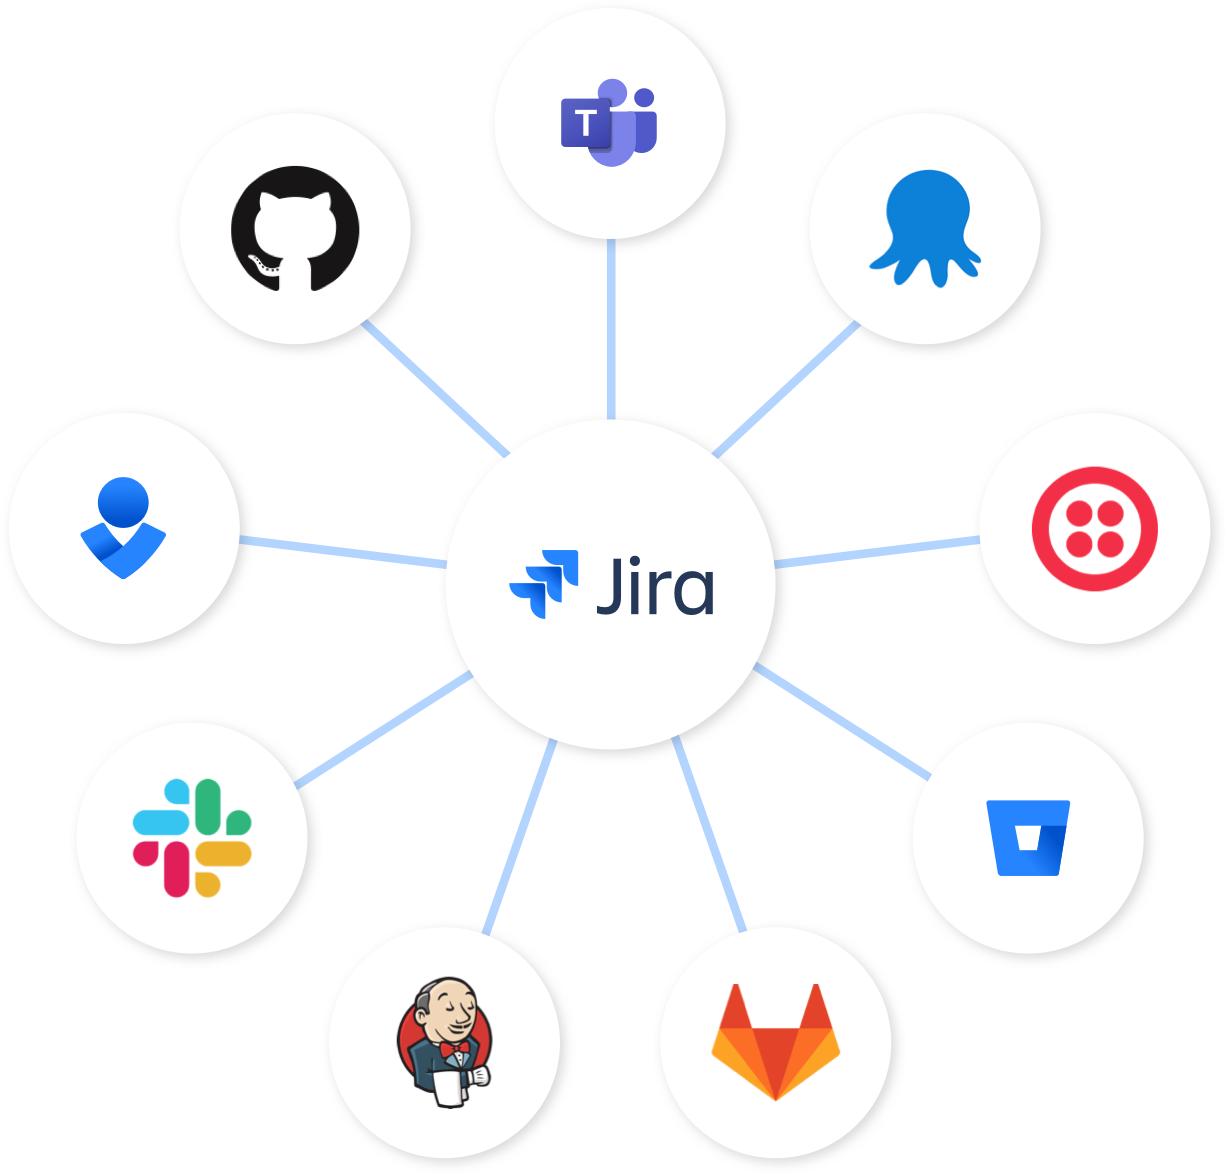 Jira node - Jira in the center with bitbucket, slack and opsgenie connected to it